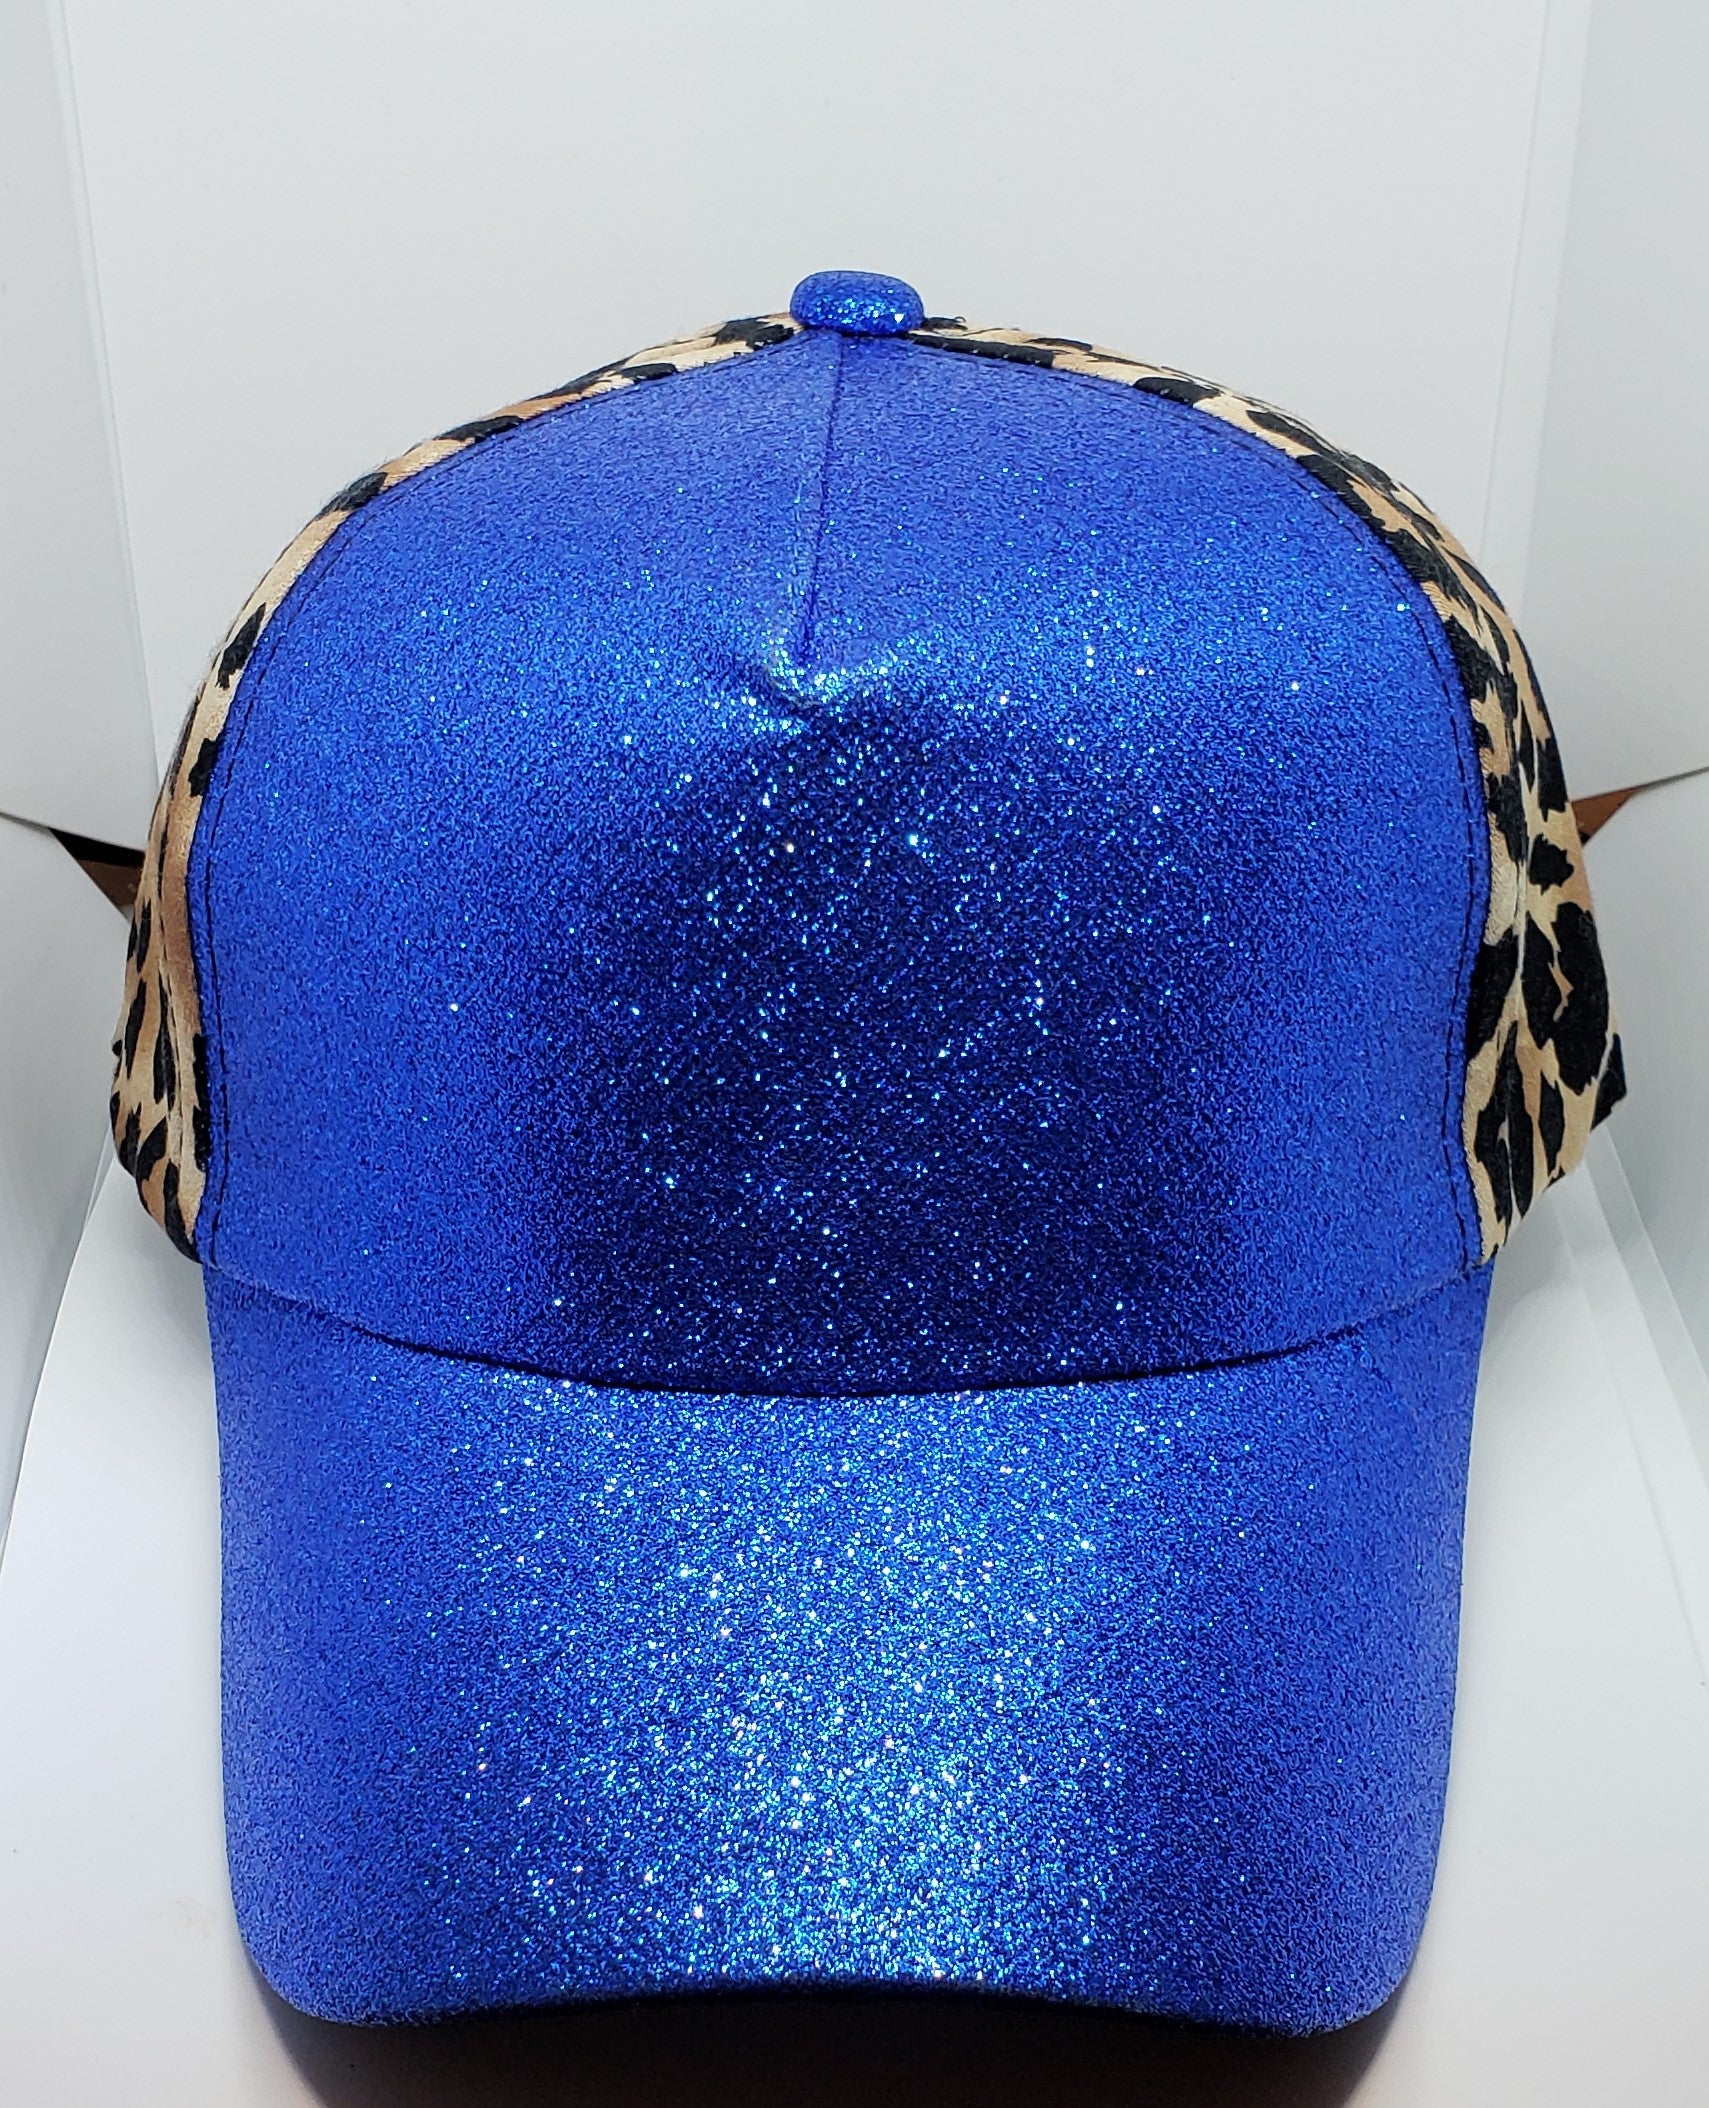 Royal Blue and Leopard Print Pony Hat